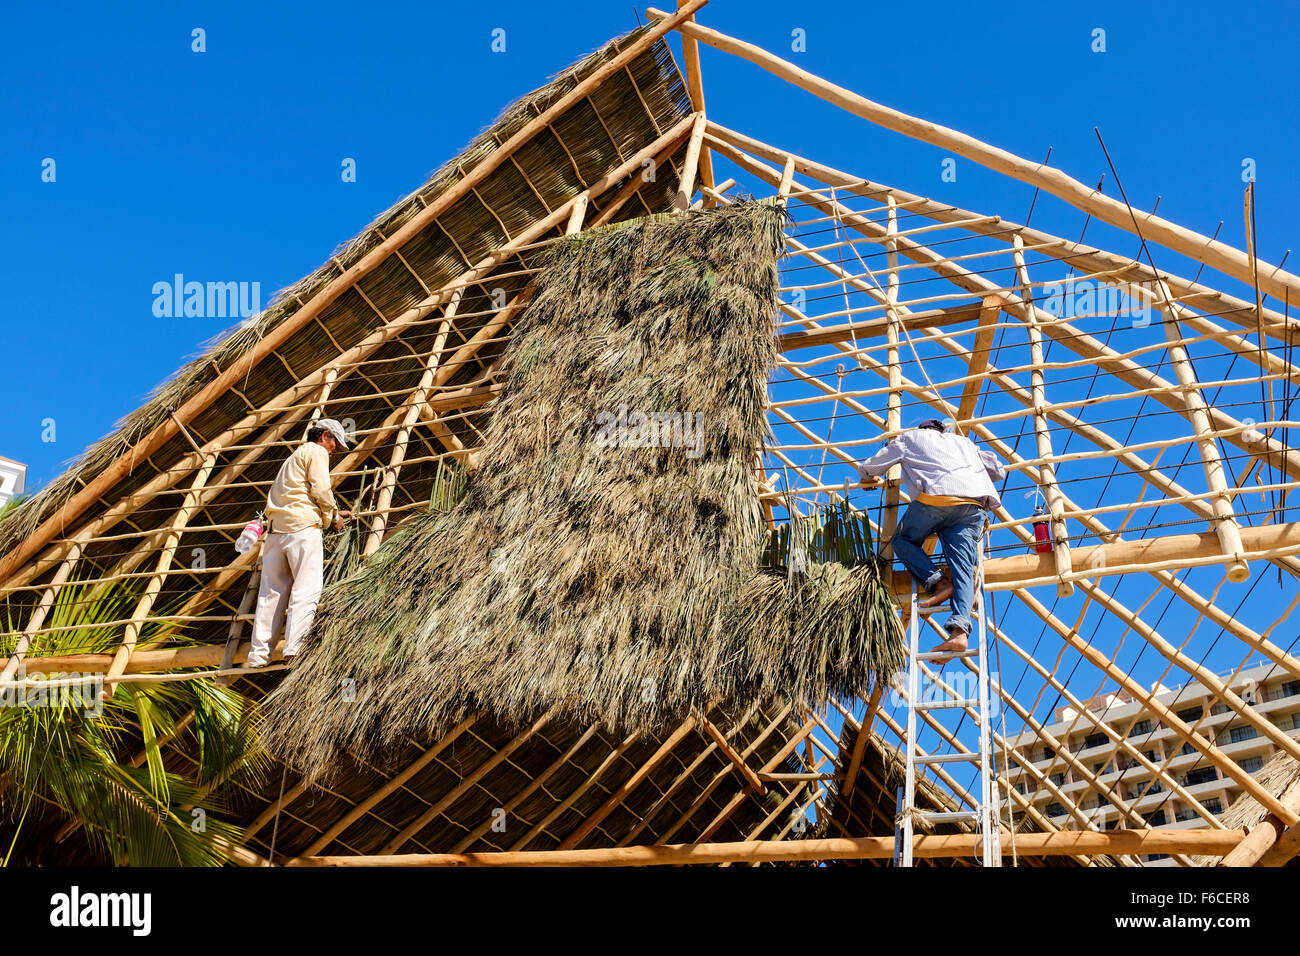 Men constructing a building using bamboo and wooden frame and covered with palm leaves and grass, Puerto Vallarta, Mexico Stock Photo